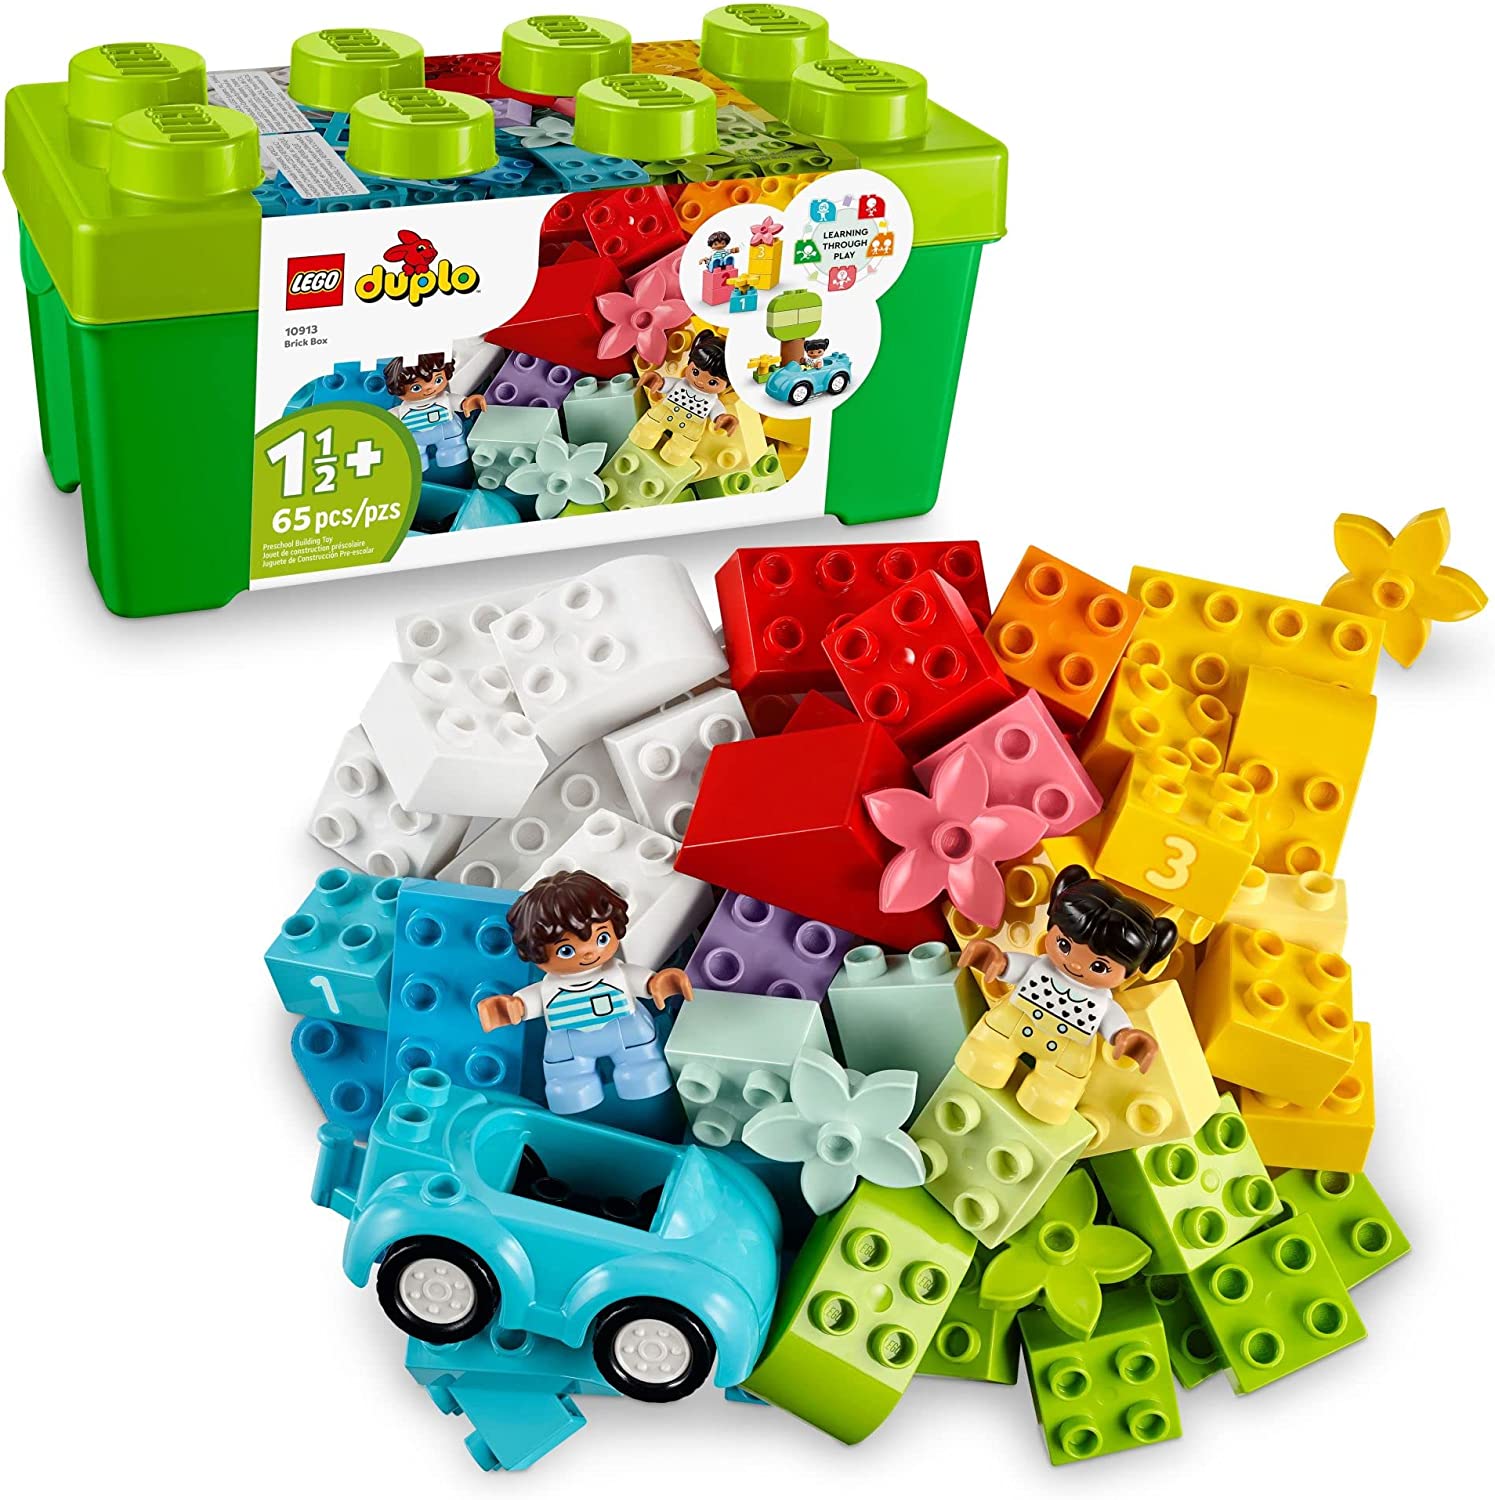 LEGO DUPLO Classic Brick Box Building Set 10913 - Features Storage Organizer, Toy Car, Number Bricks, Build, Learn, and Play, Great Gift Playset for Toddlers